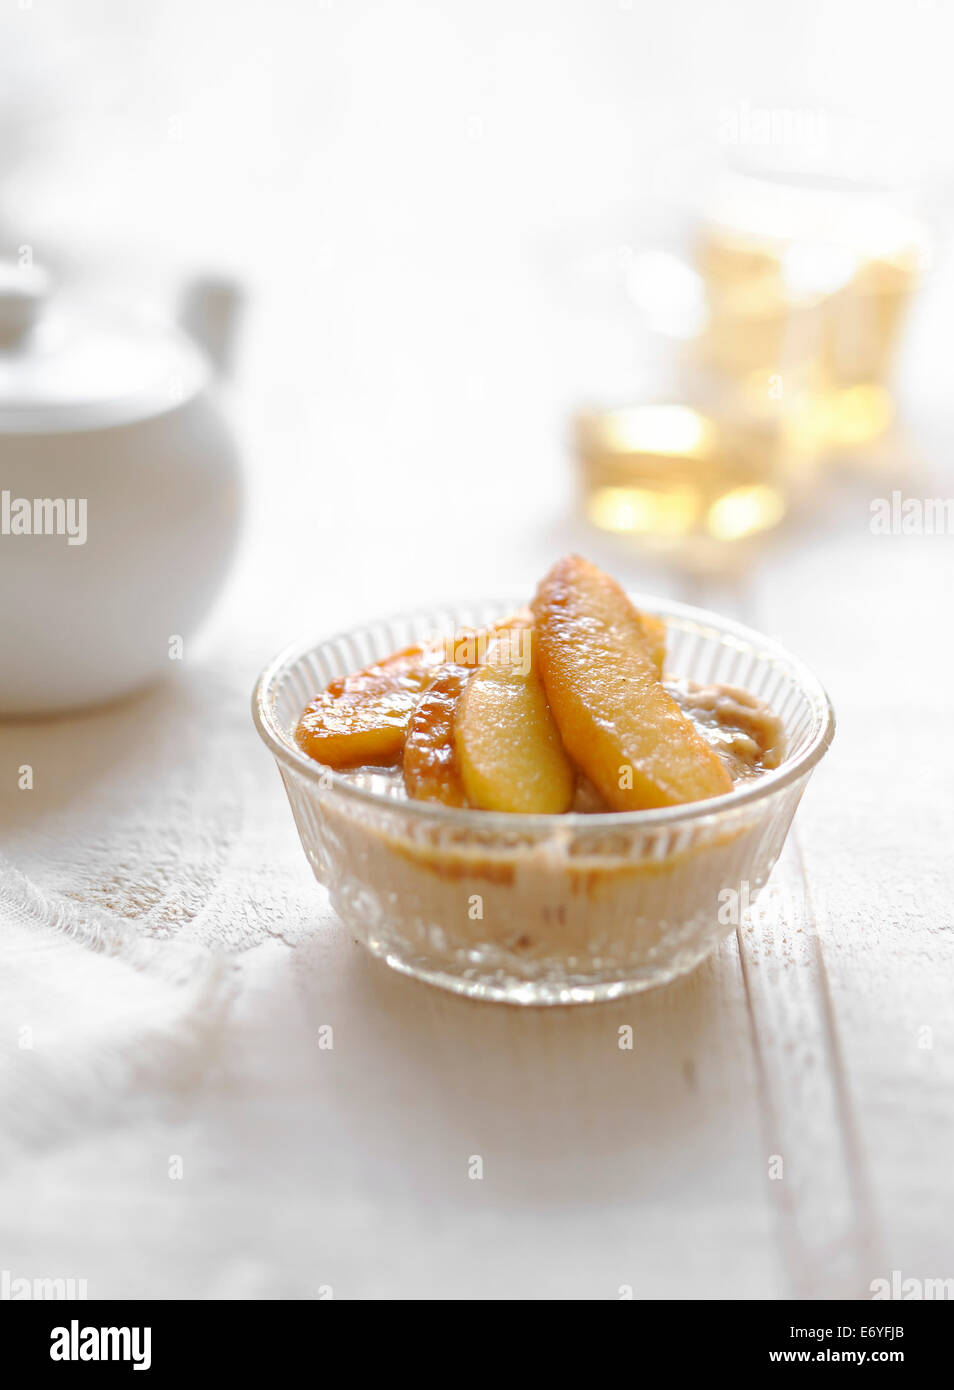 Chestnut mousse with roasted apples Stock Photo